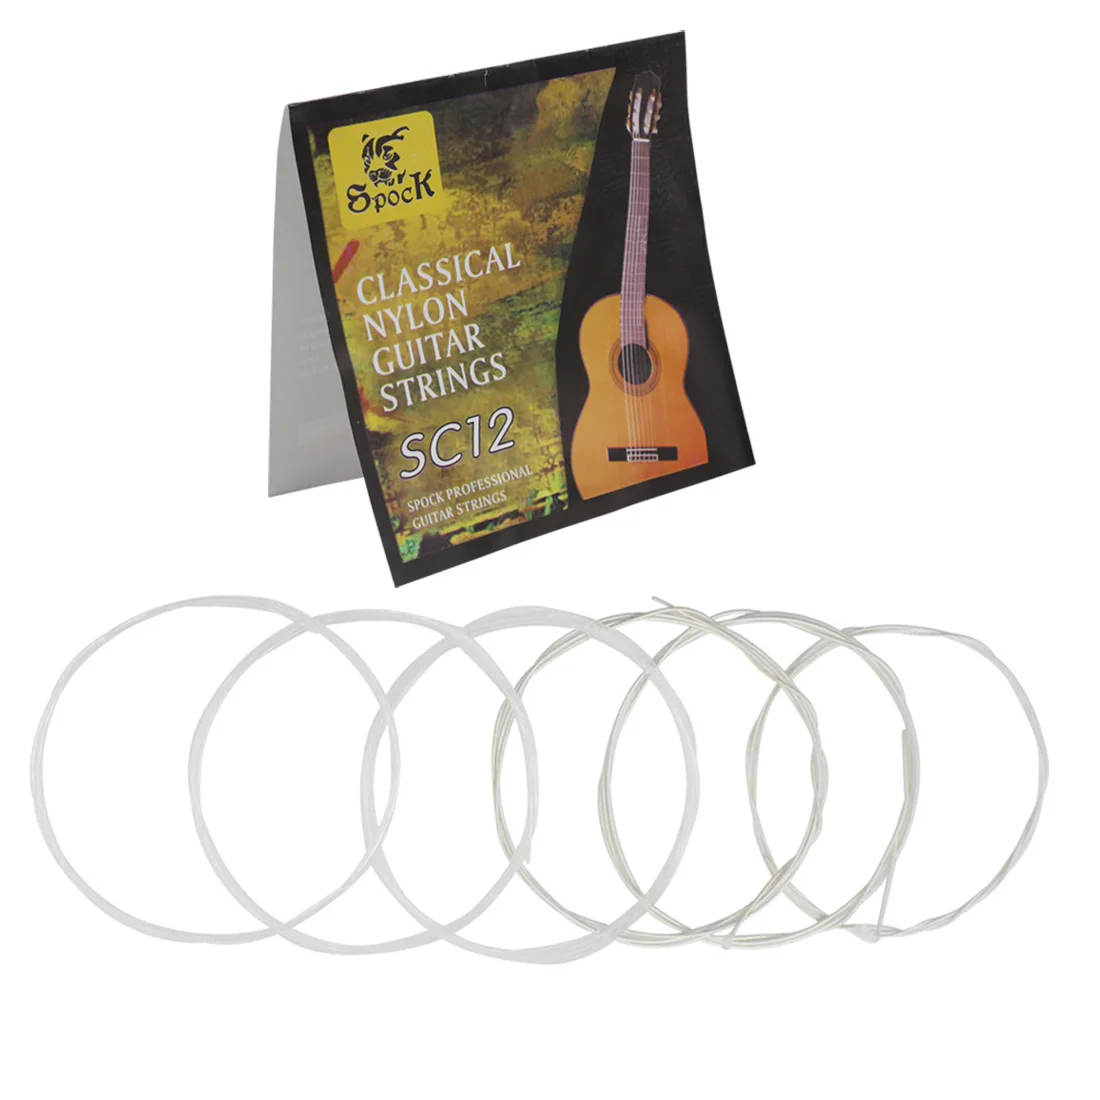 3 Set of 18pcs String Classical Guitar Nylon Strings Replacement Accessories